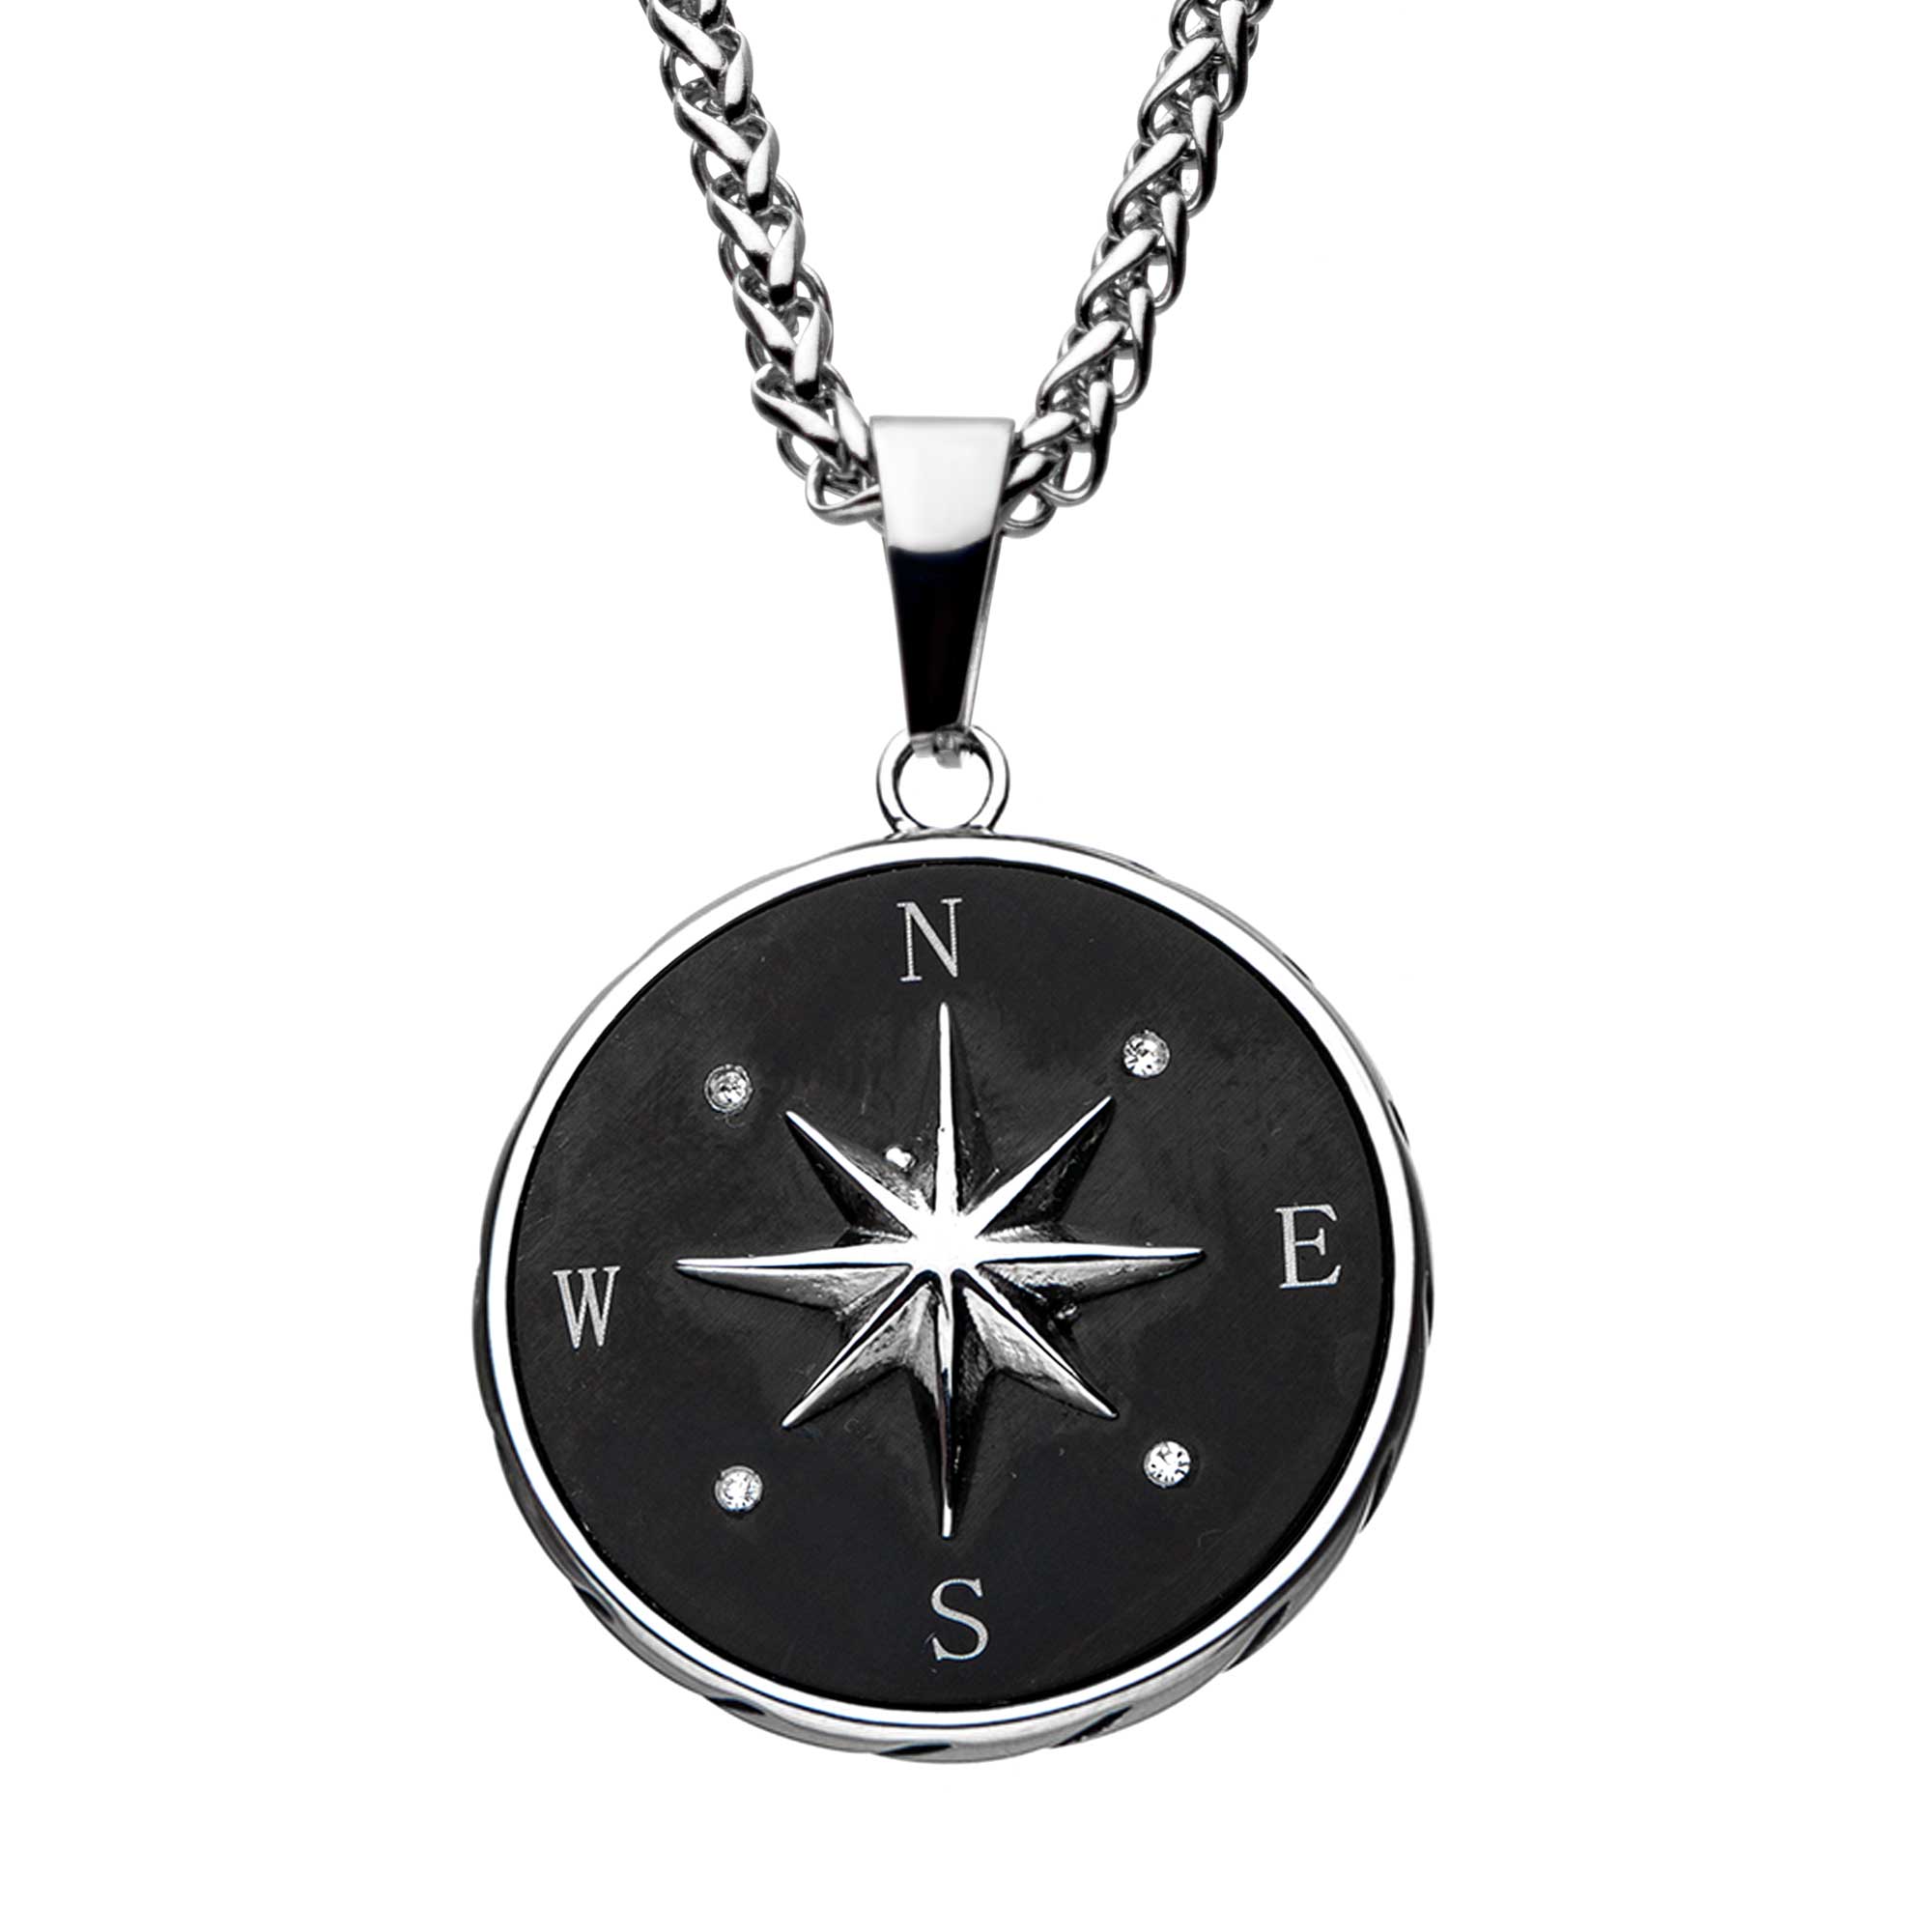 Stainless Steel and Black Plated Compass Pendant with Chain Mueller Jewelers Chisago City, MN